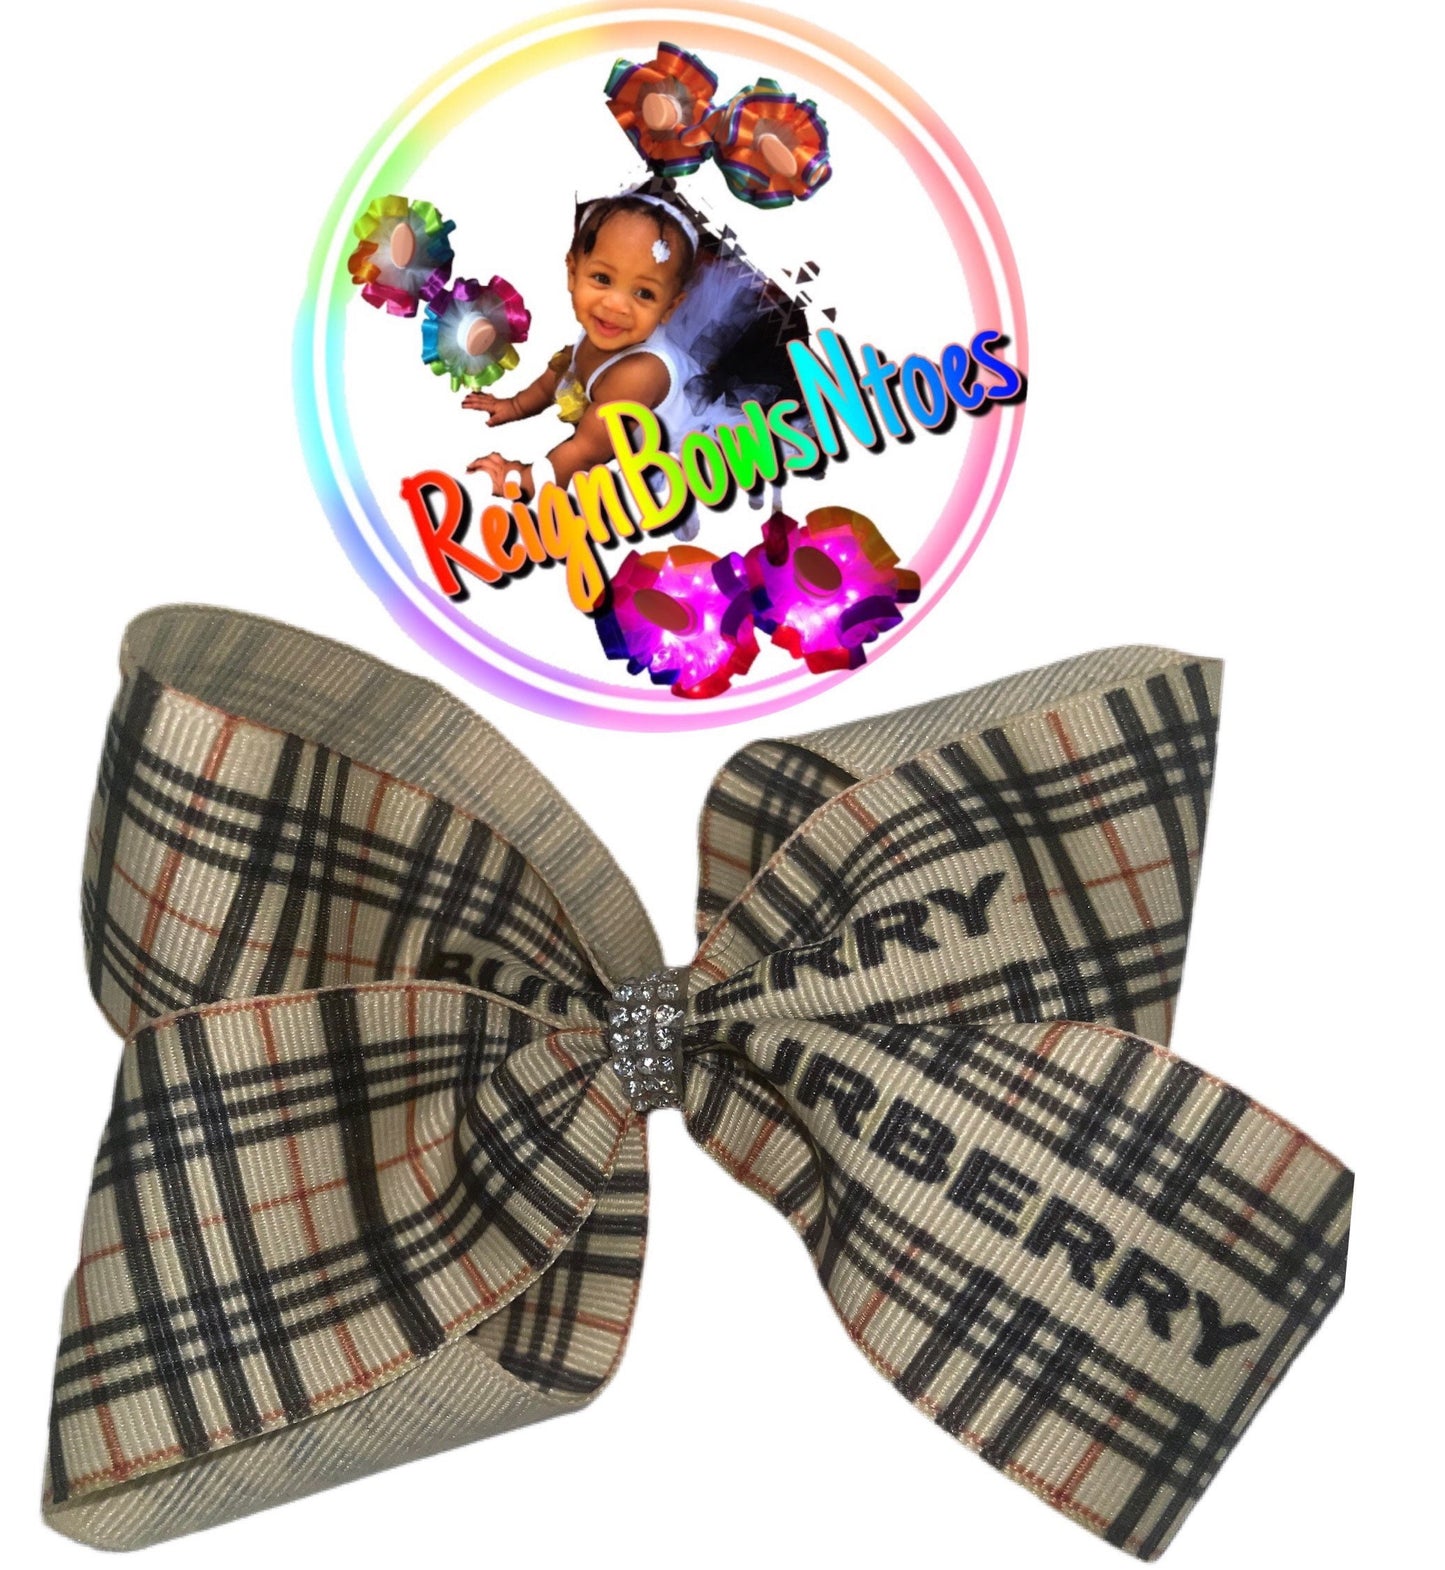 Do you need a bow(s) to match your socks? - ReignBowsNtoes